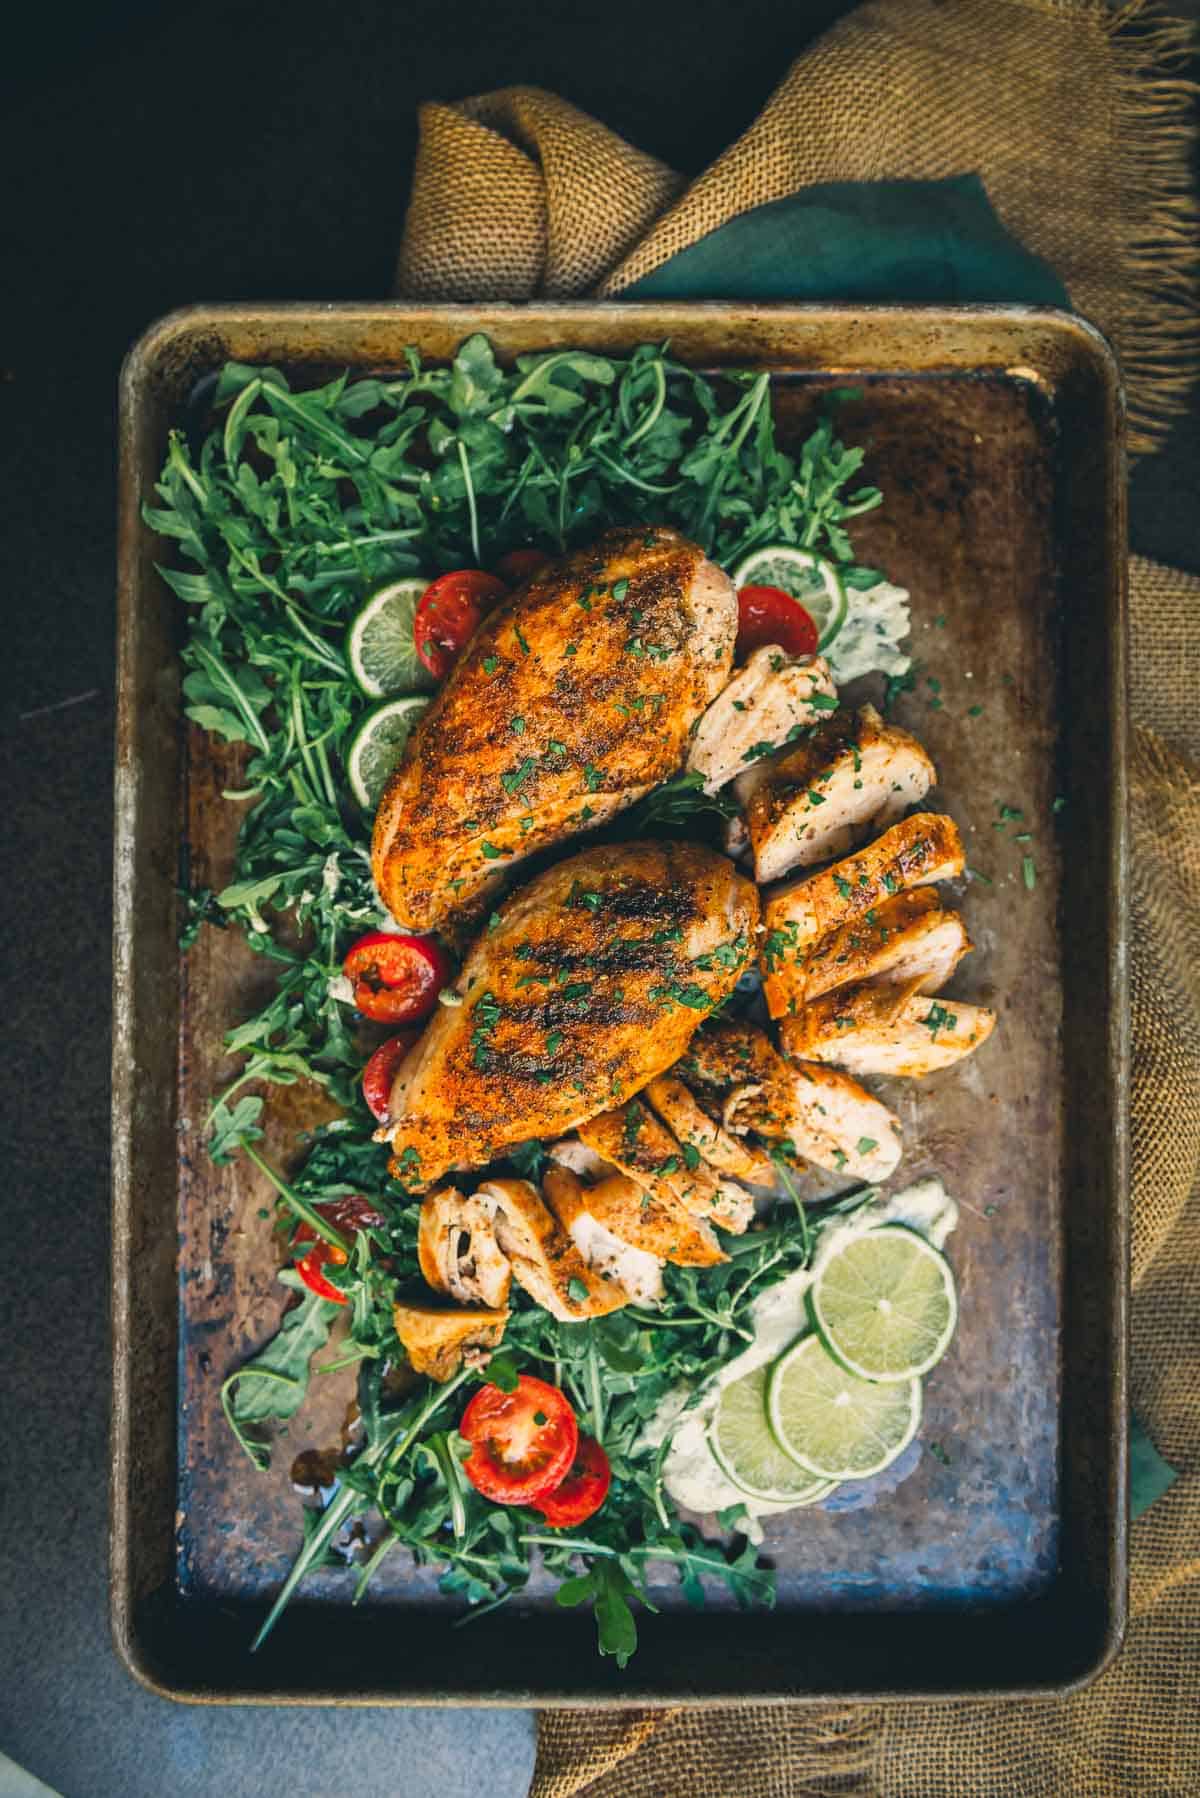 Grilled bone-in chicken on a platter with grill marks and one sliced for serving.